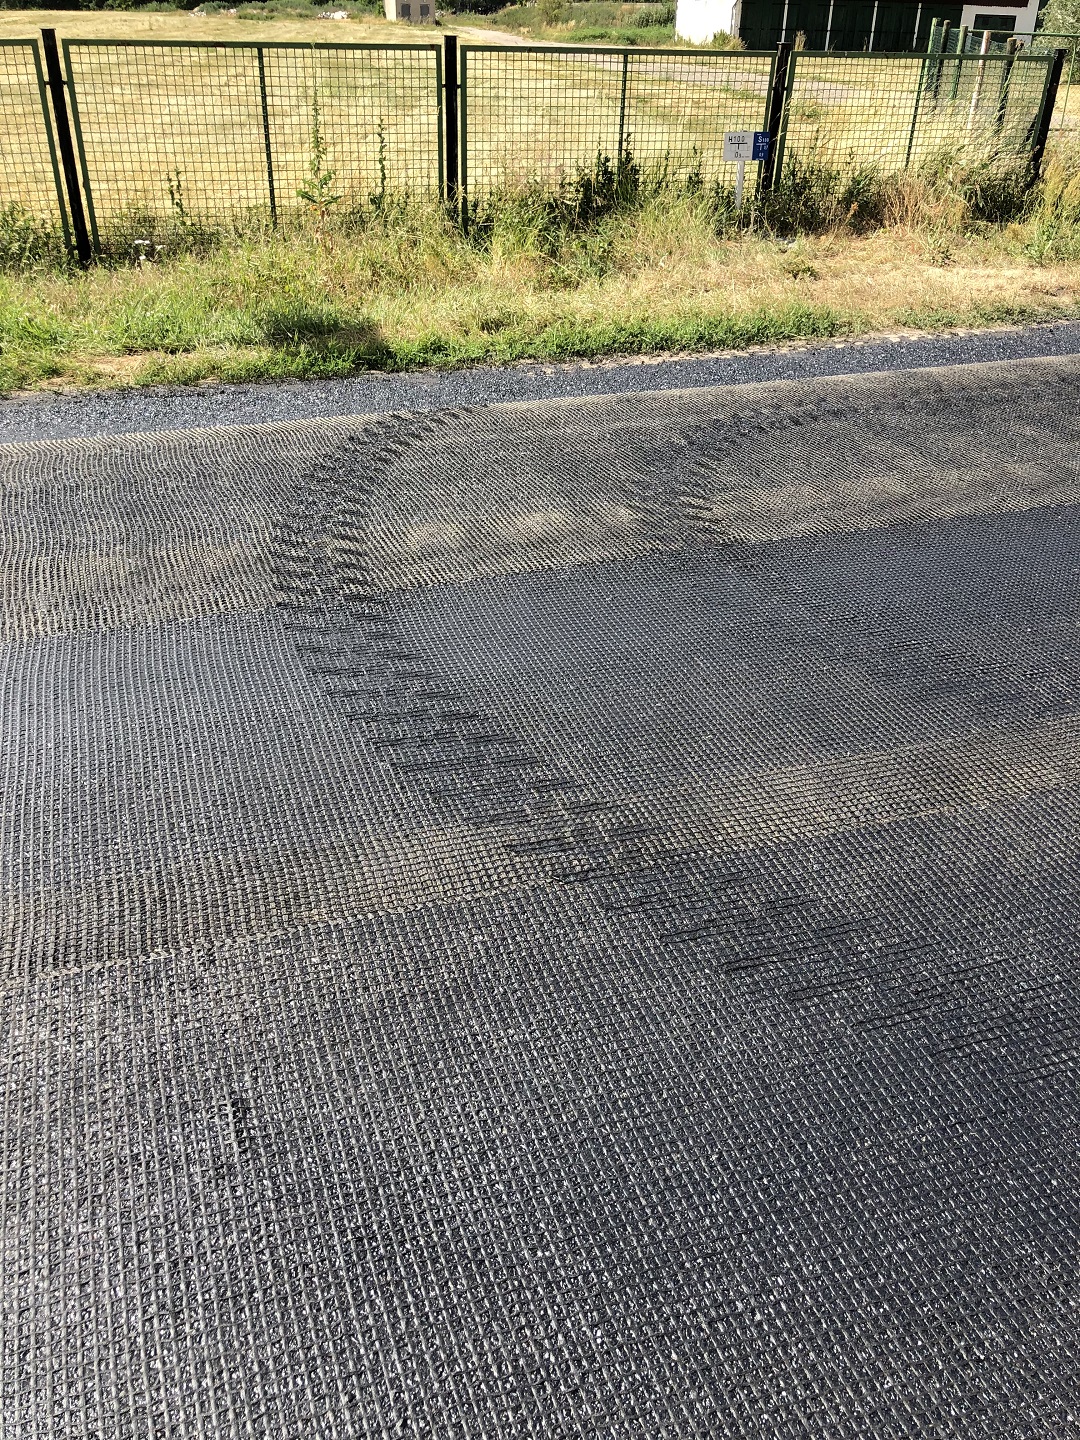 No problems for construction traffic driving over the Glasphalt™ G, reinforcement grid, due to the optimal bonding and factory applied sanding of the grids